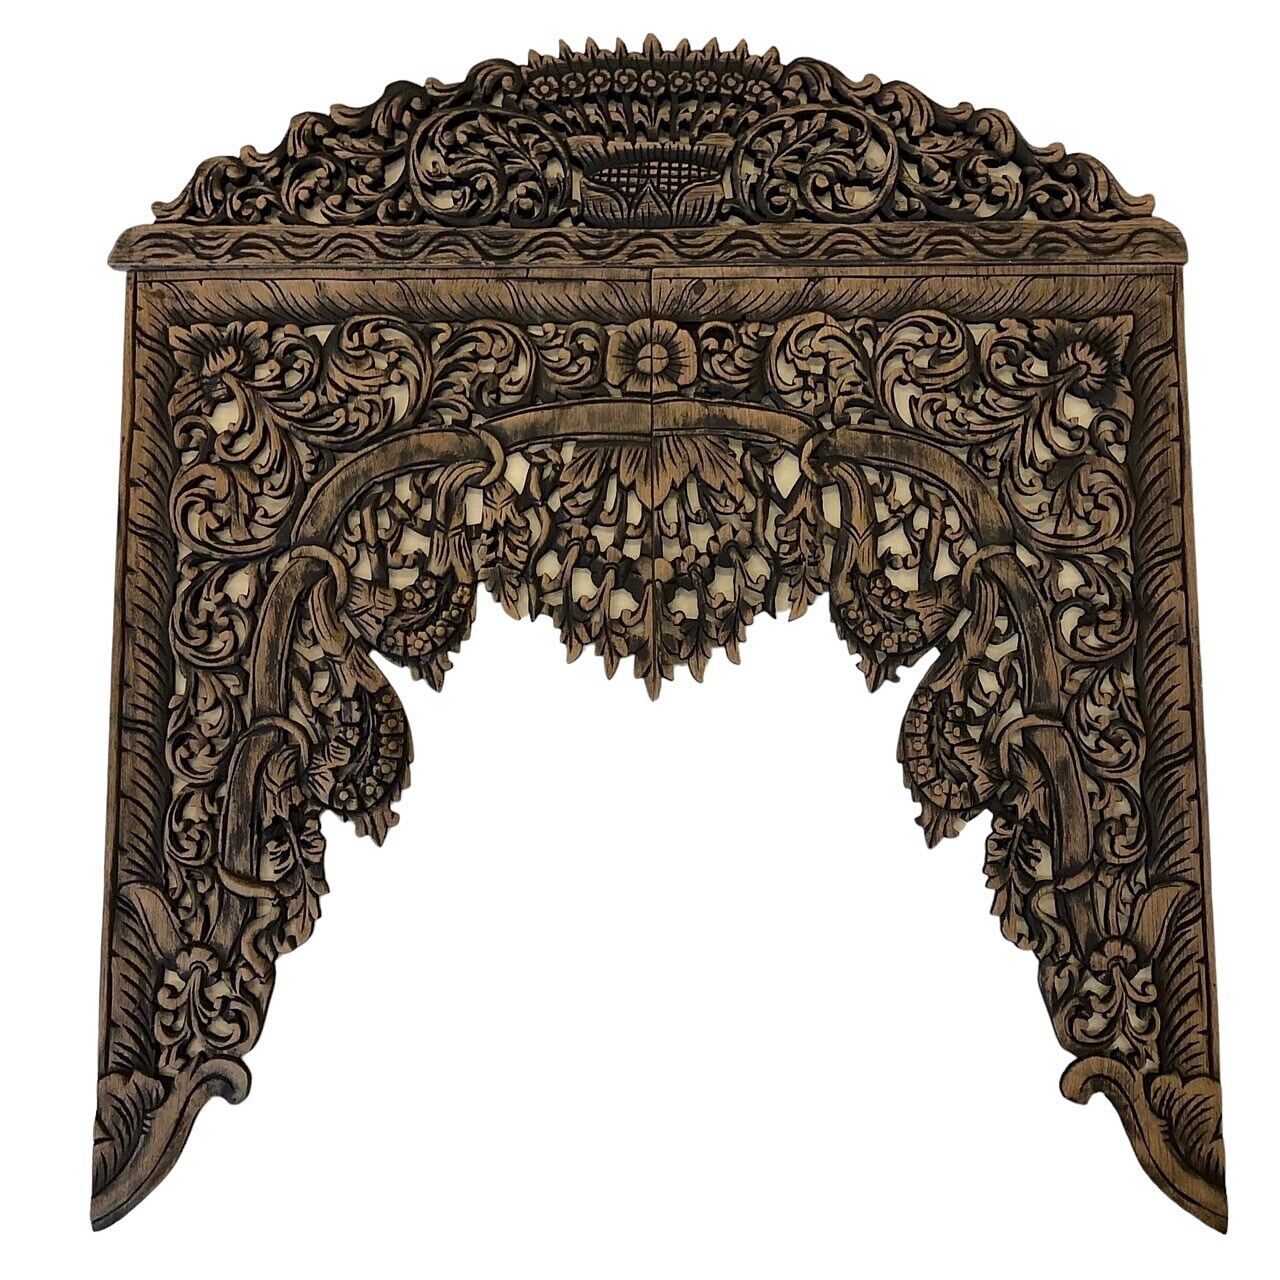 Wood Carving Entrance Gate Decoration Antique Style Art Wall Hanging Home Decor